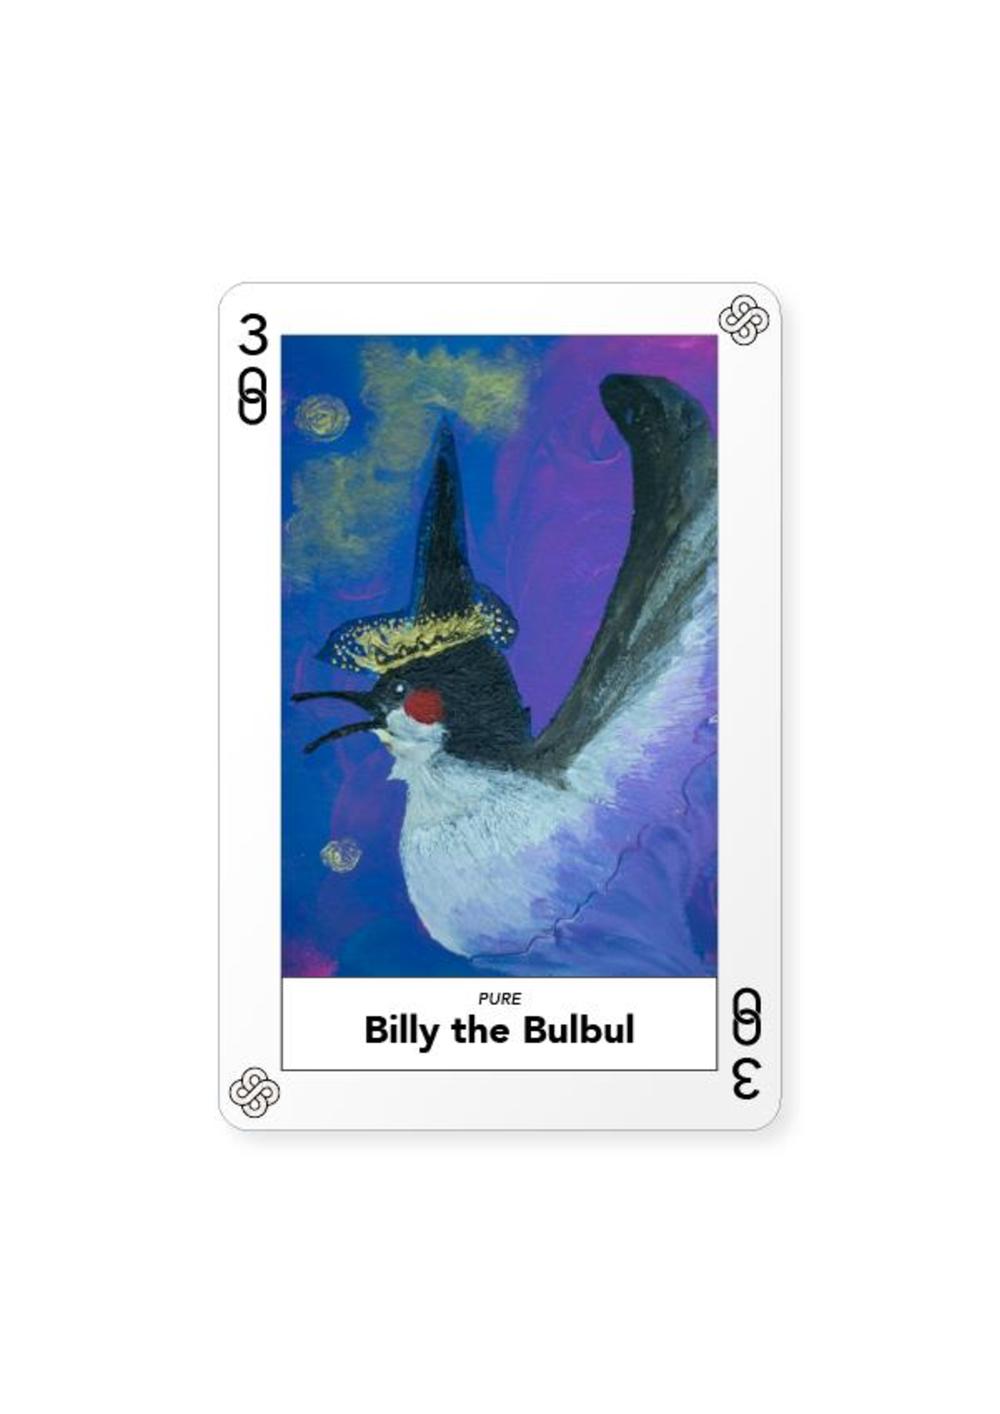 Certificate of Authenticity and Consignment - Billy the Bulbul